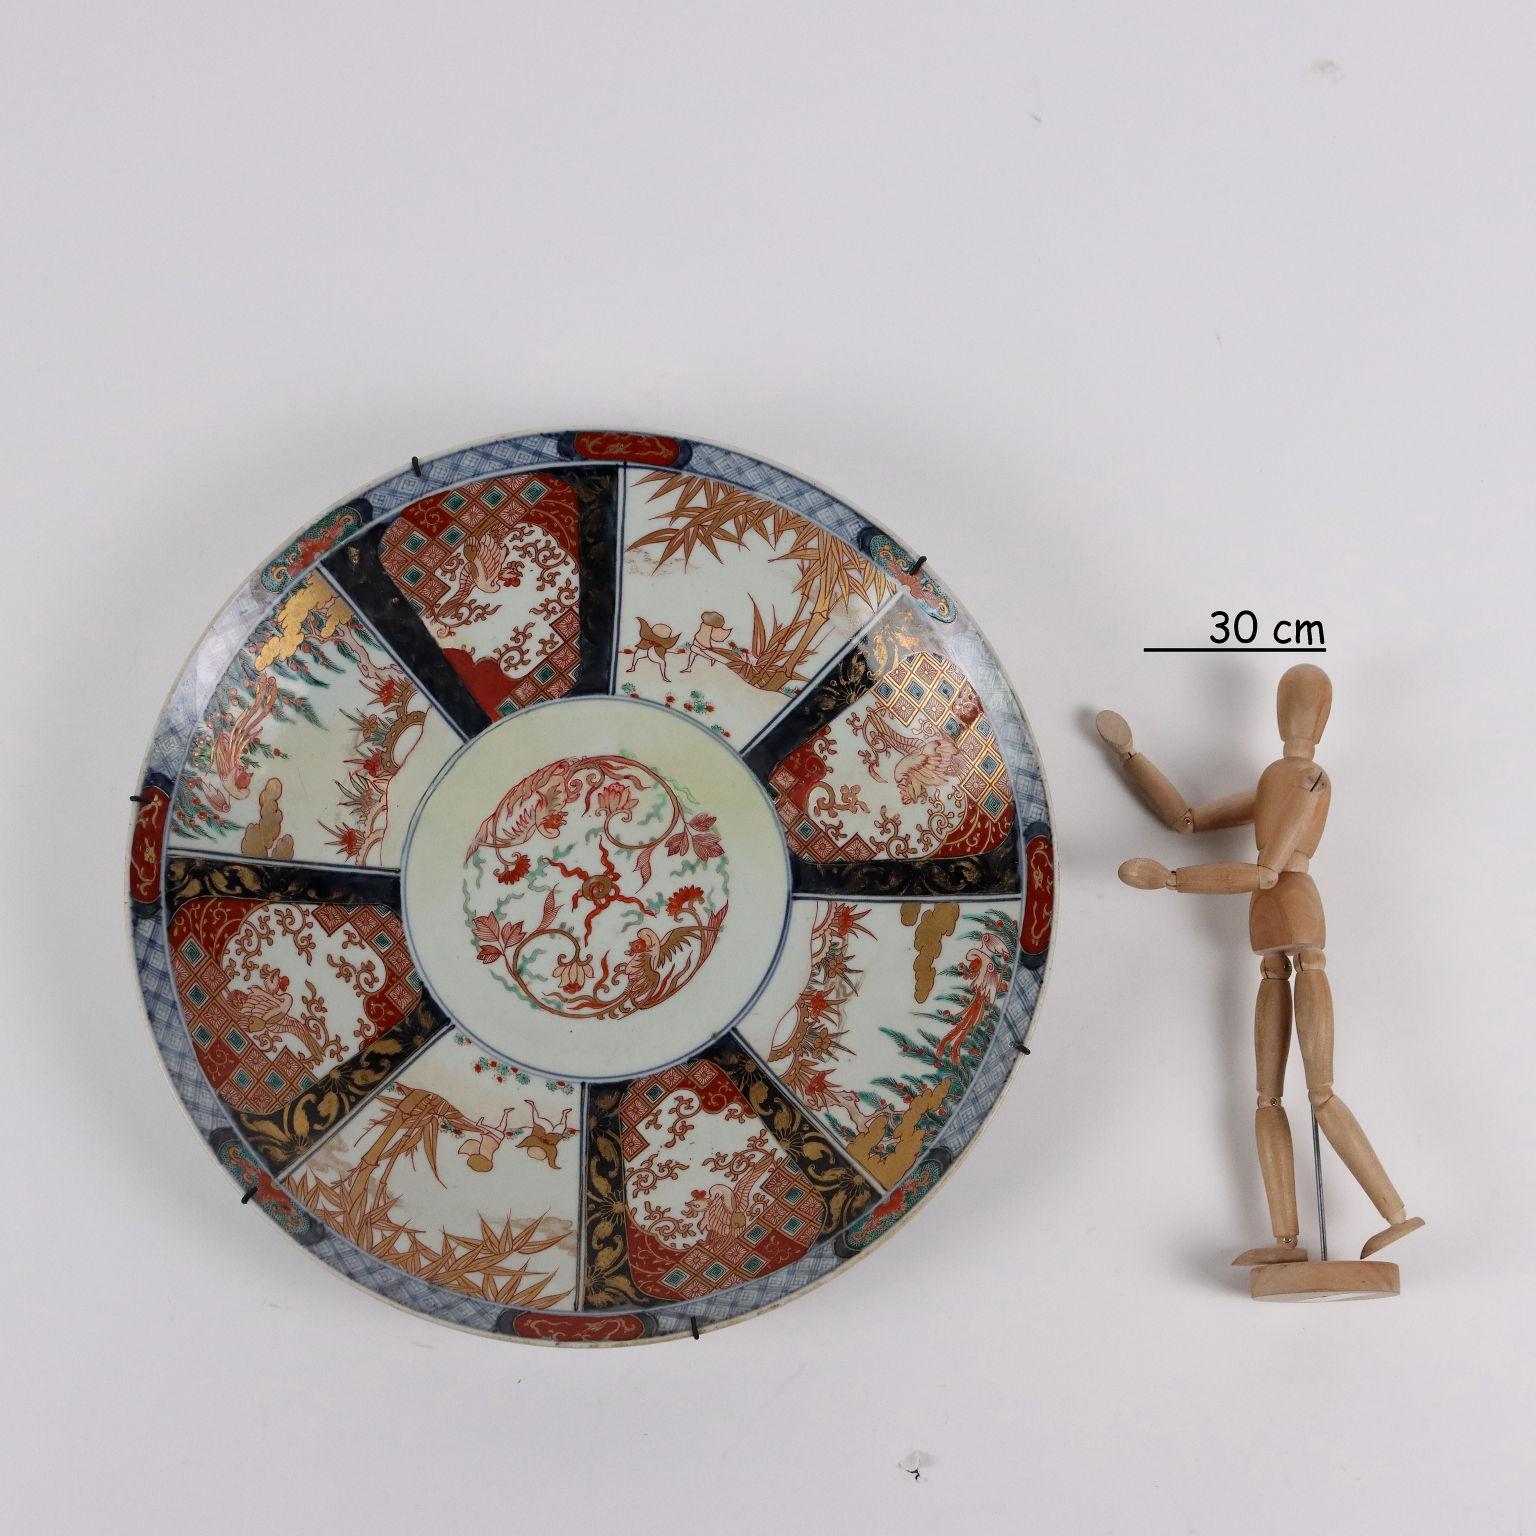 Imari plate in porcelain painted with polychrome enamels, on the bottom in a circle, two opposing phoenixes between plant racemes and a flaming pearl in the center. From a frame to it in a radial scheme within cartouches, various naturalistic